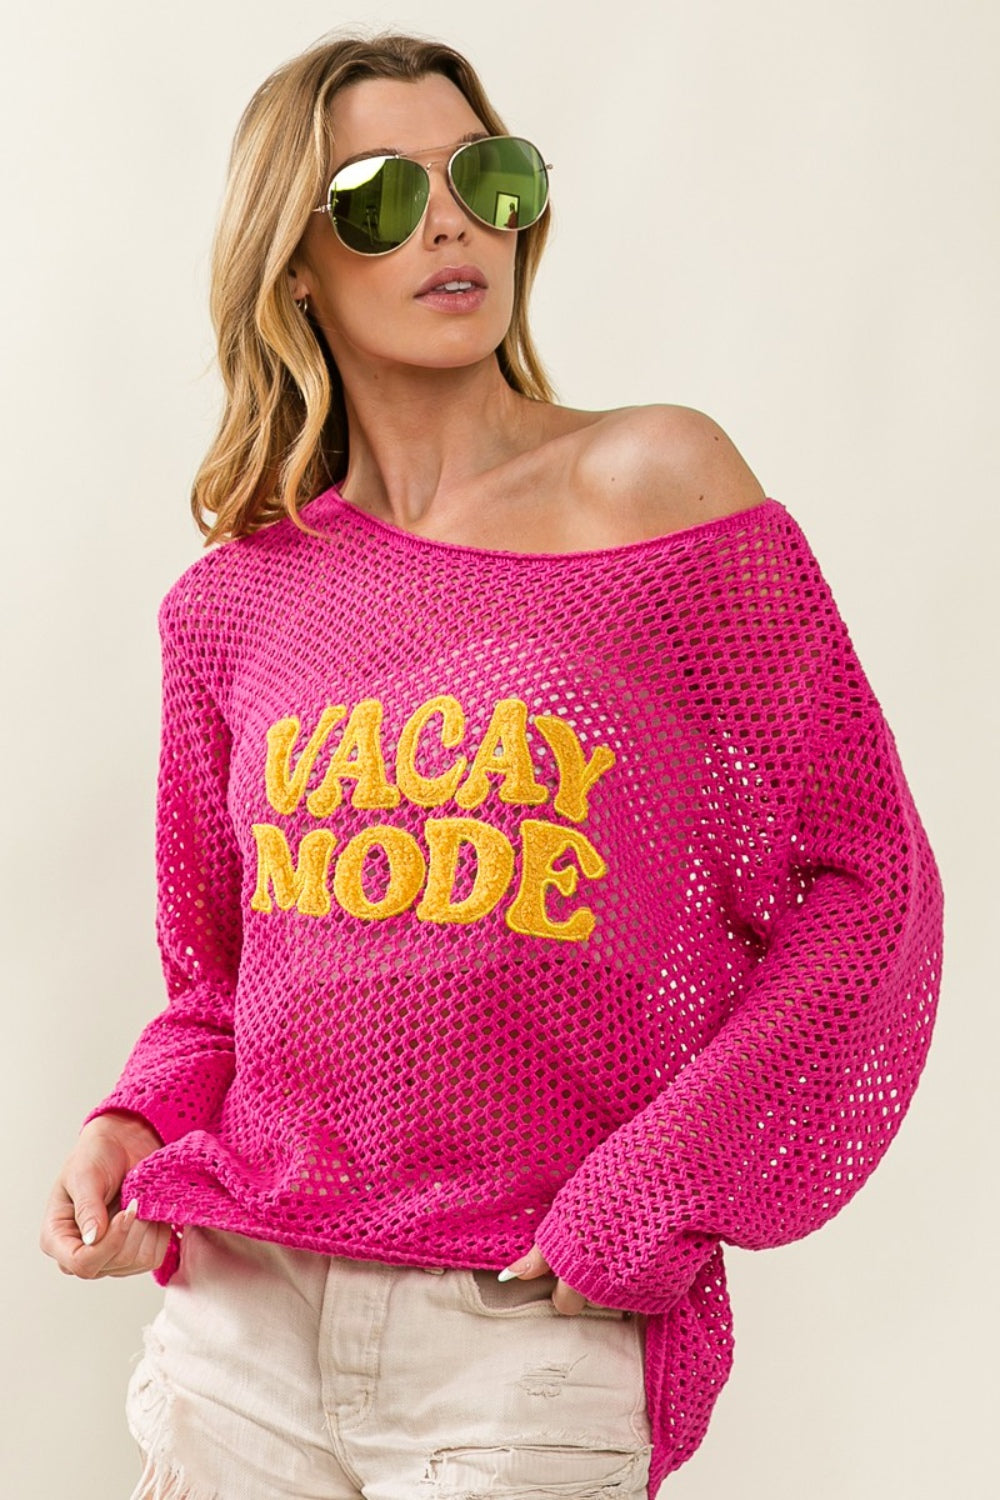 Vacay Mode Embroidered Knit Cover Up